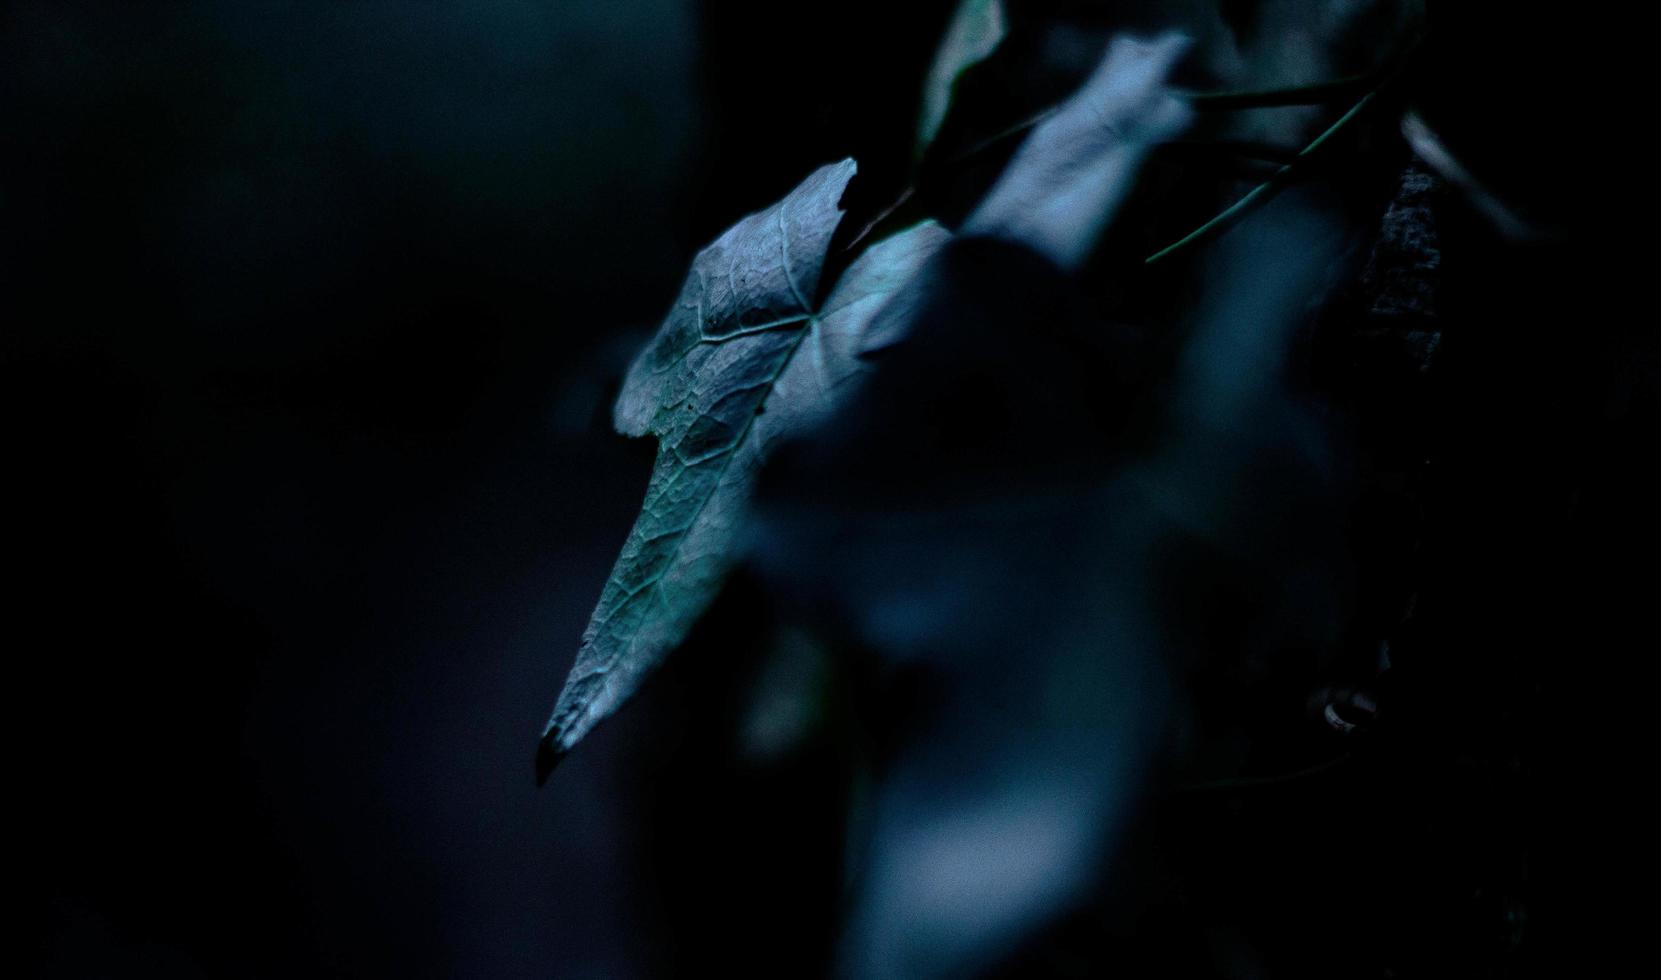 Ivy leaves at night photo